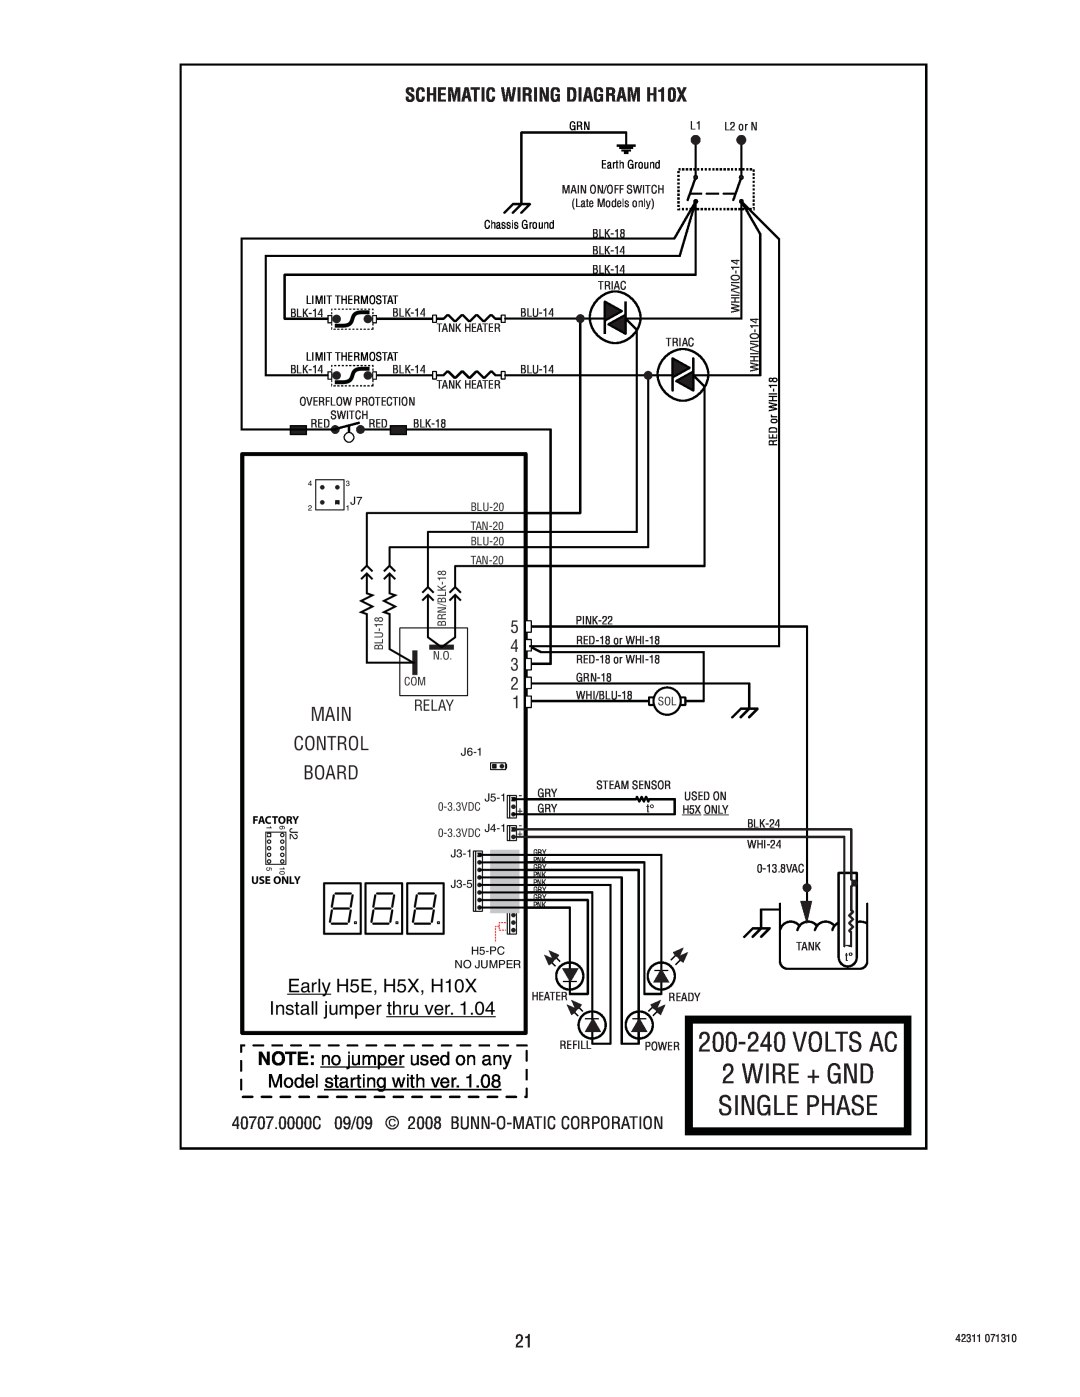 Bunn Volts Ac, Wire + Gnd, Single Phase, SCHEMATIC WIRING DIAGRAM H10X, Early H5E, H5X, H10X, Install jumper thru ver 